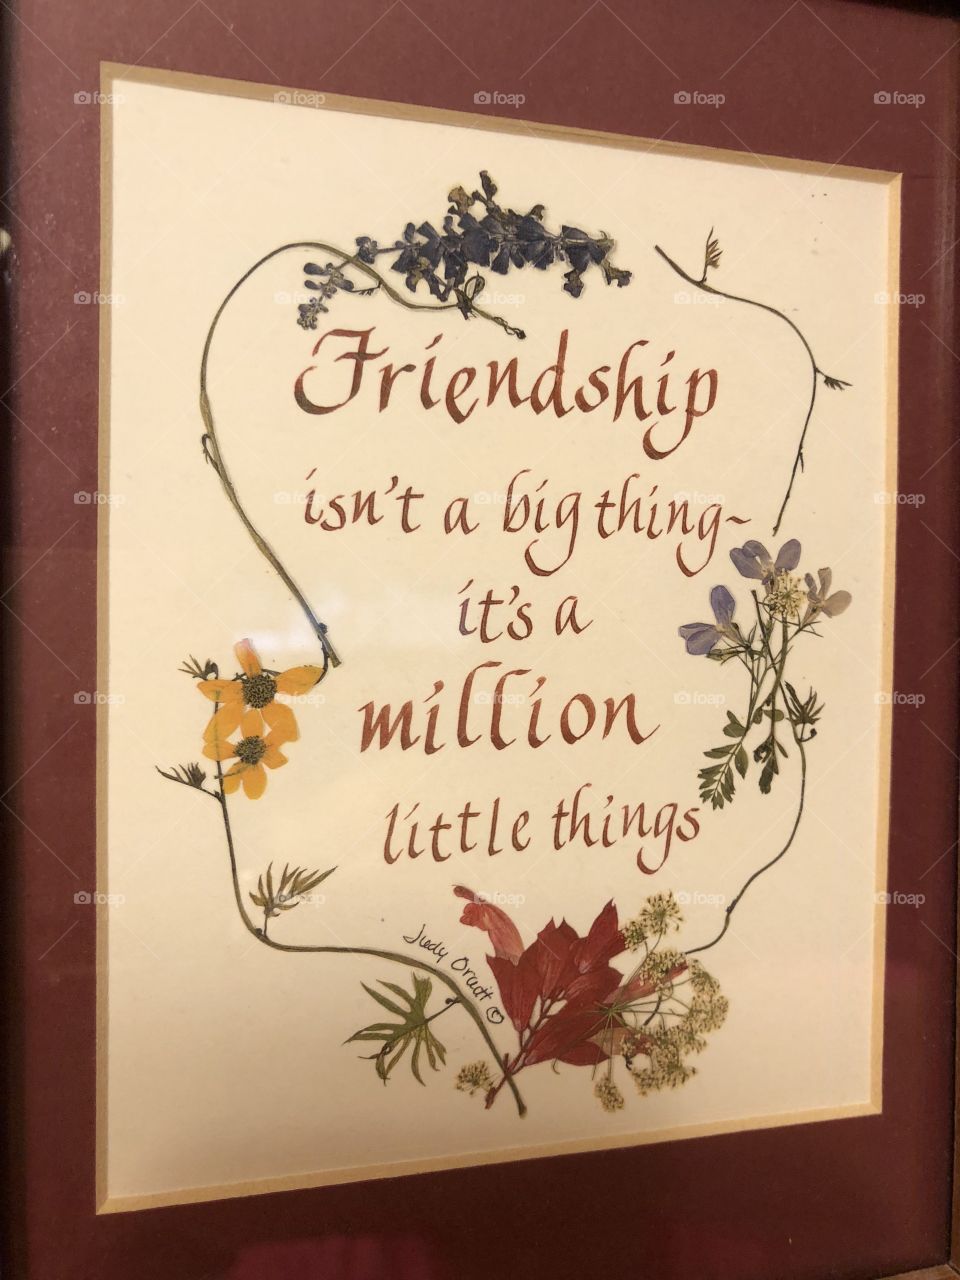 Sign of friendship